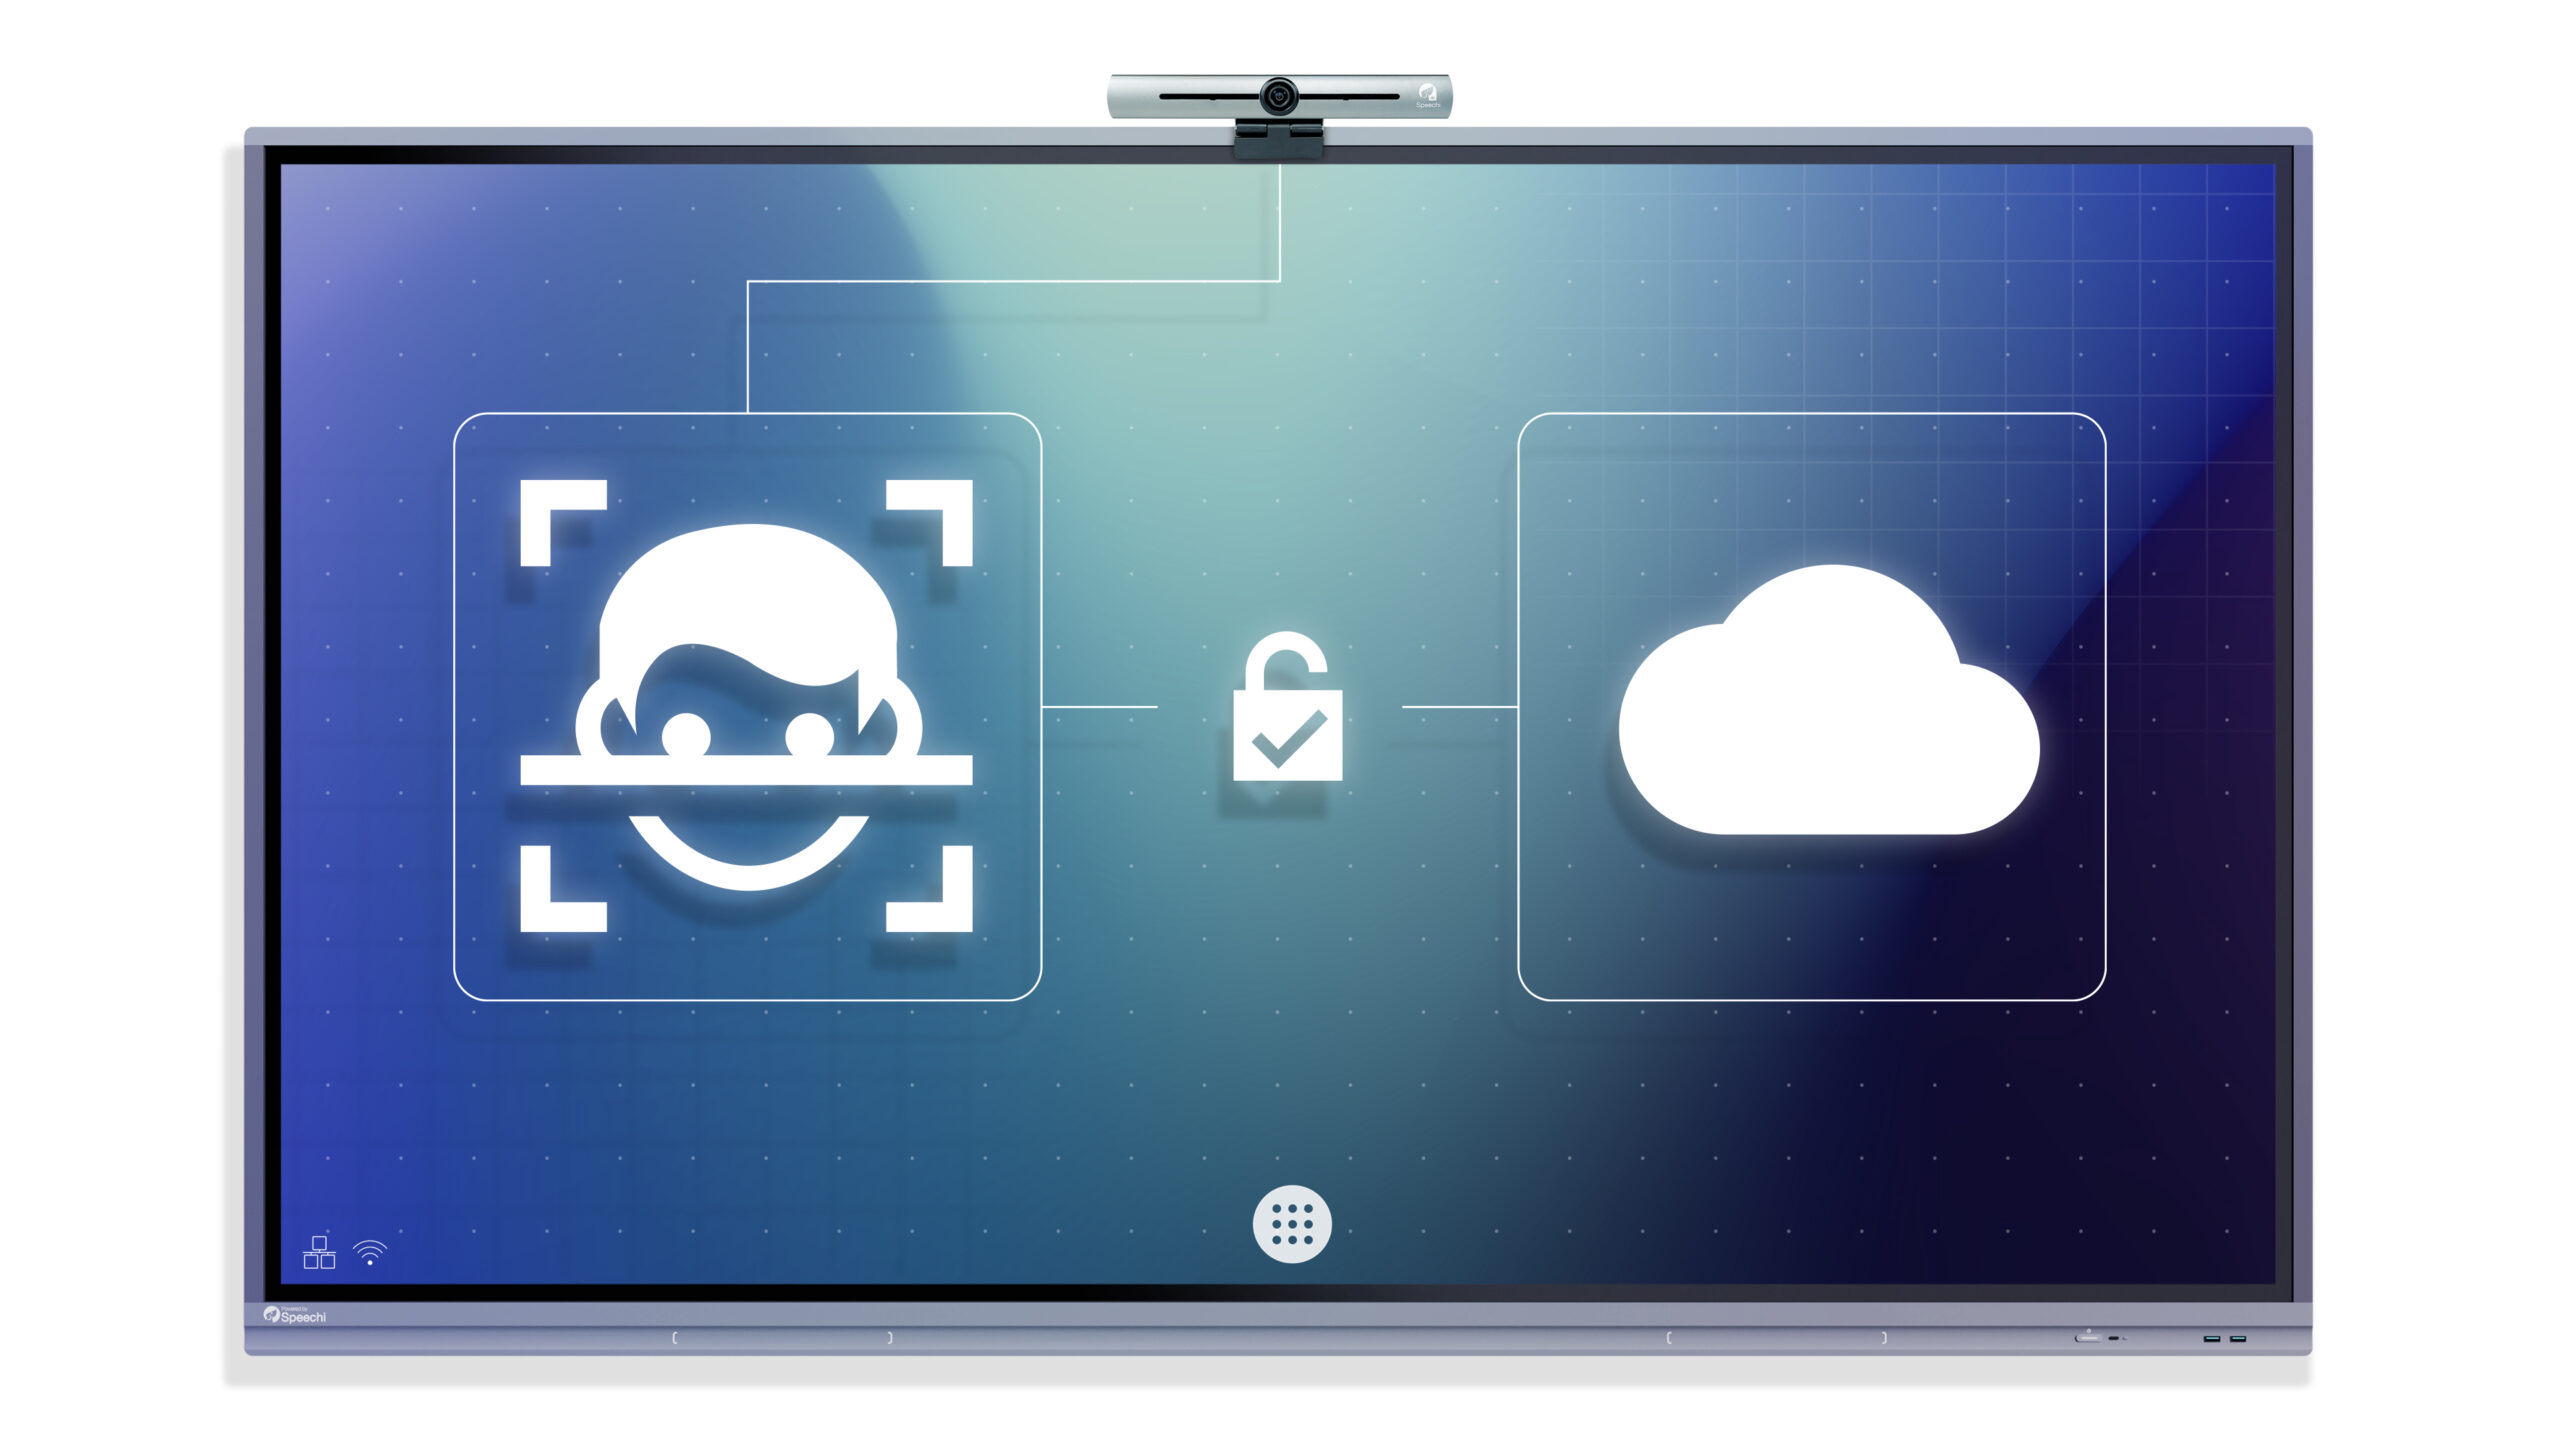 Integrated cloud on interactive screen to access and share your work files at any time